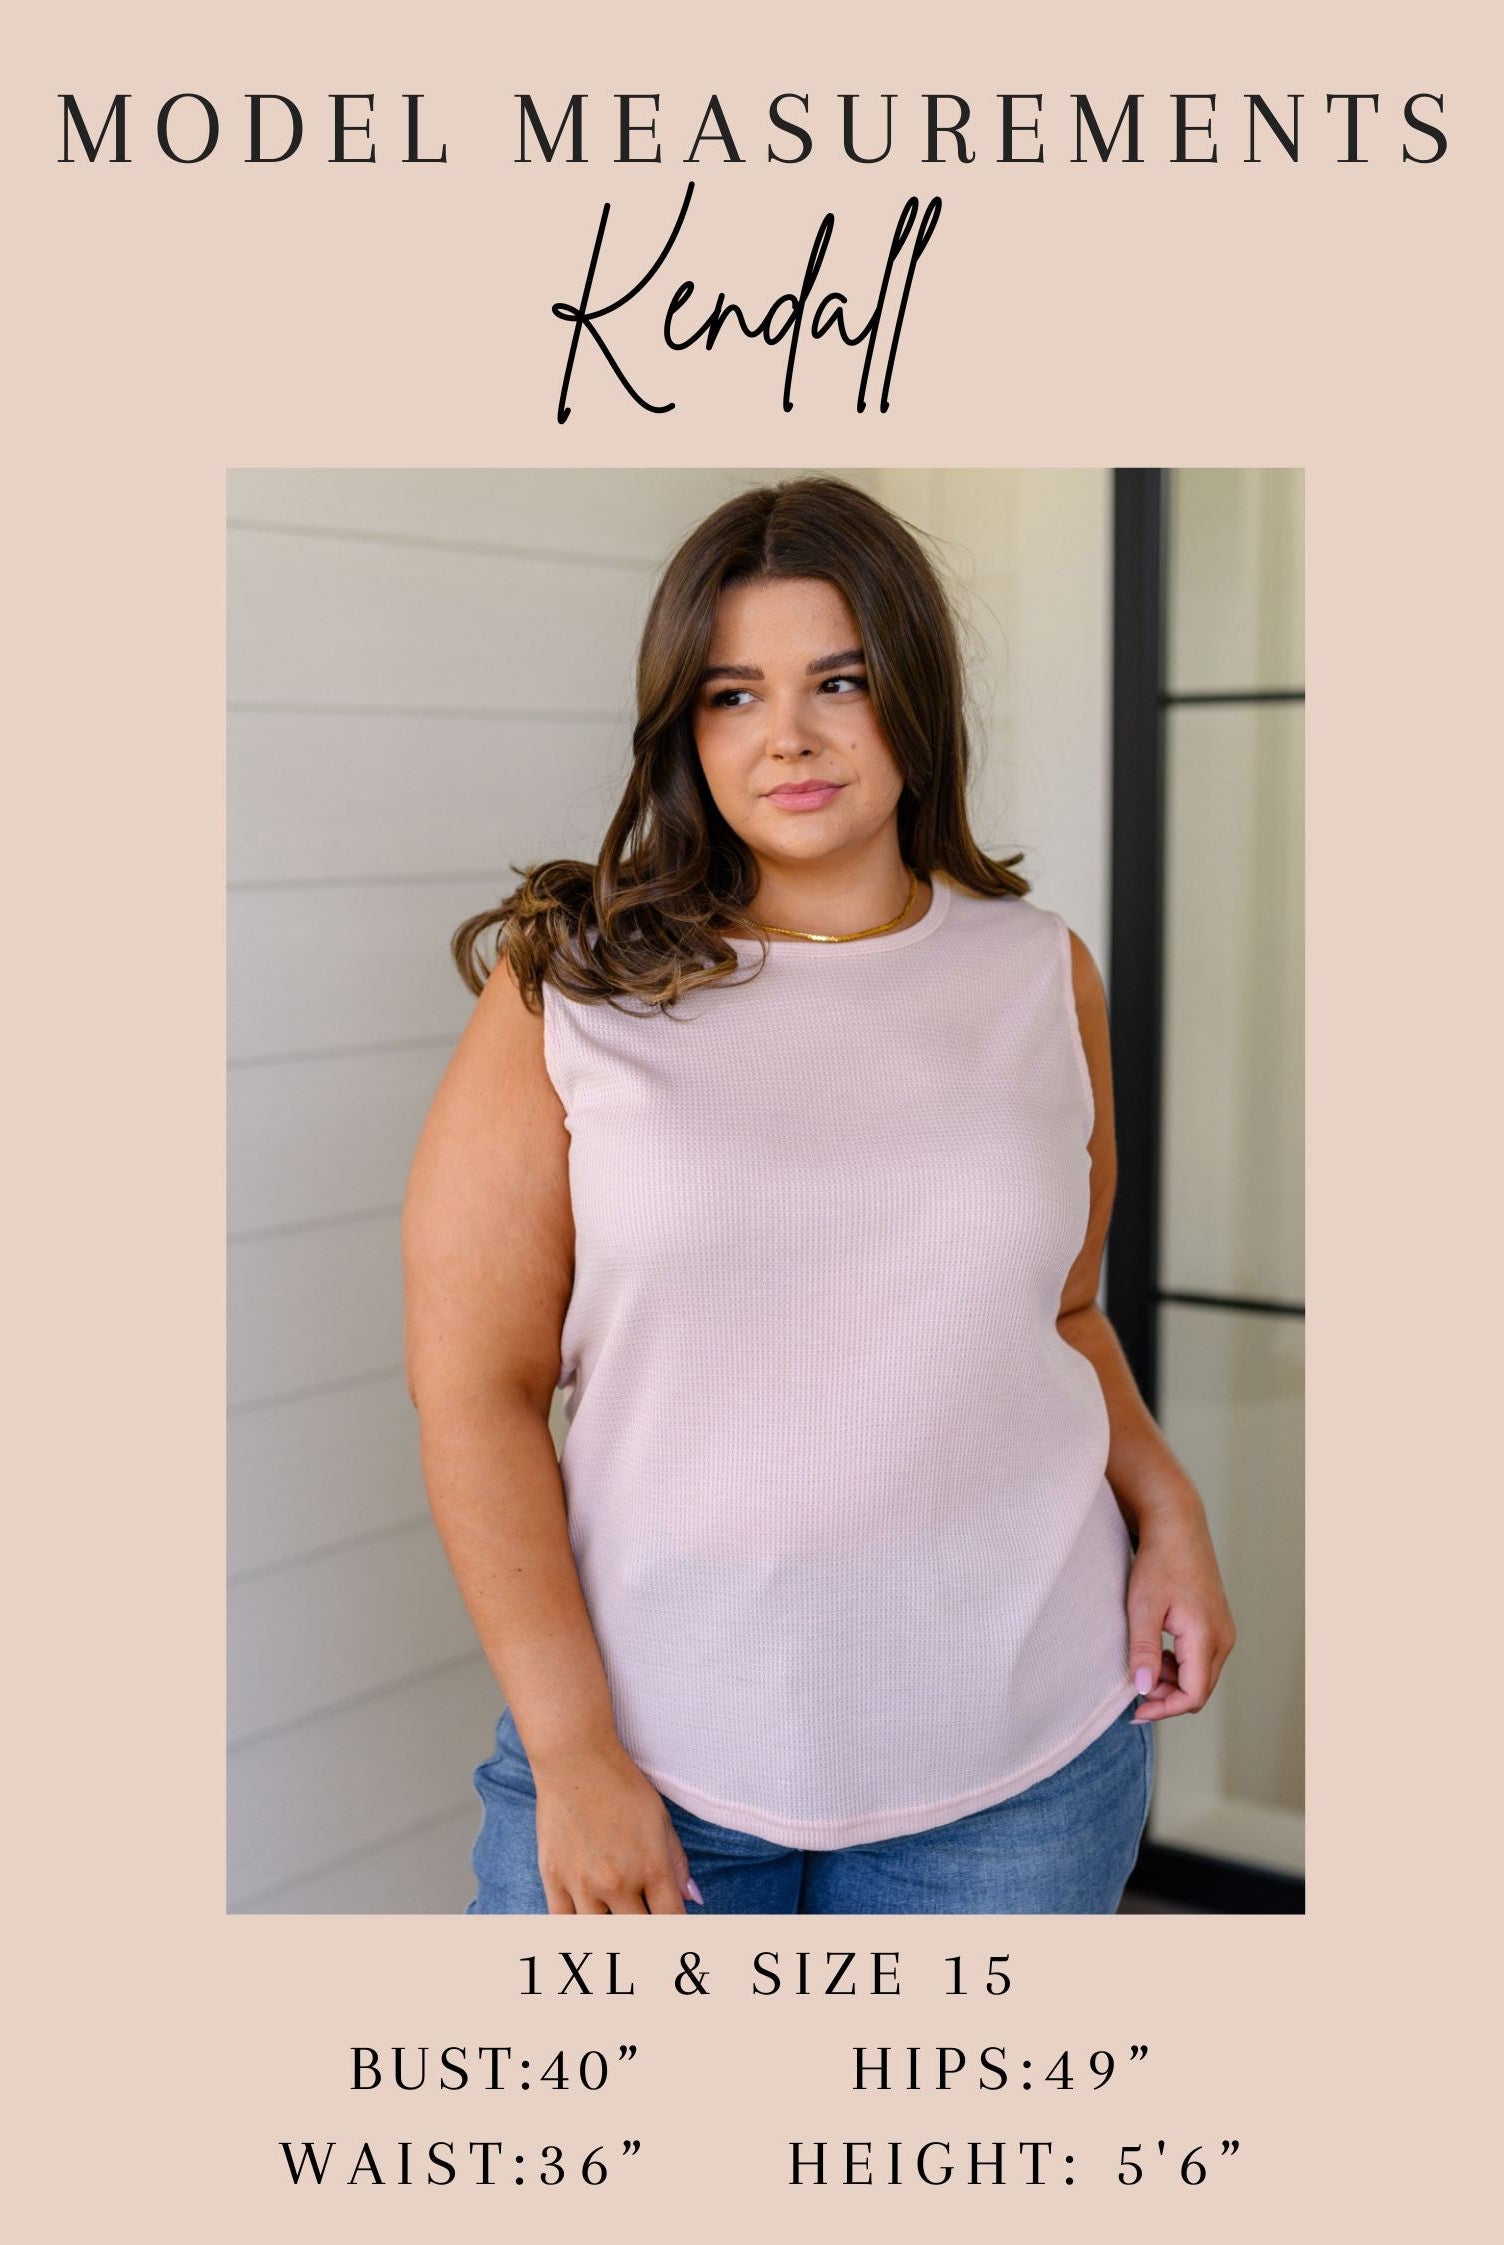 Mention Me Floral Accent Top in Toasted Almond-Short Sleeve Tops-Krush Kandy, Women's Online Fashion Boutique Located in Phoenix, Arizona (Scottsdale Area)